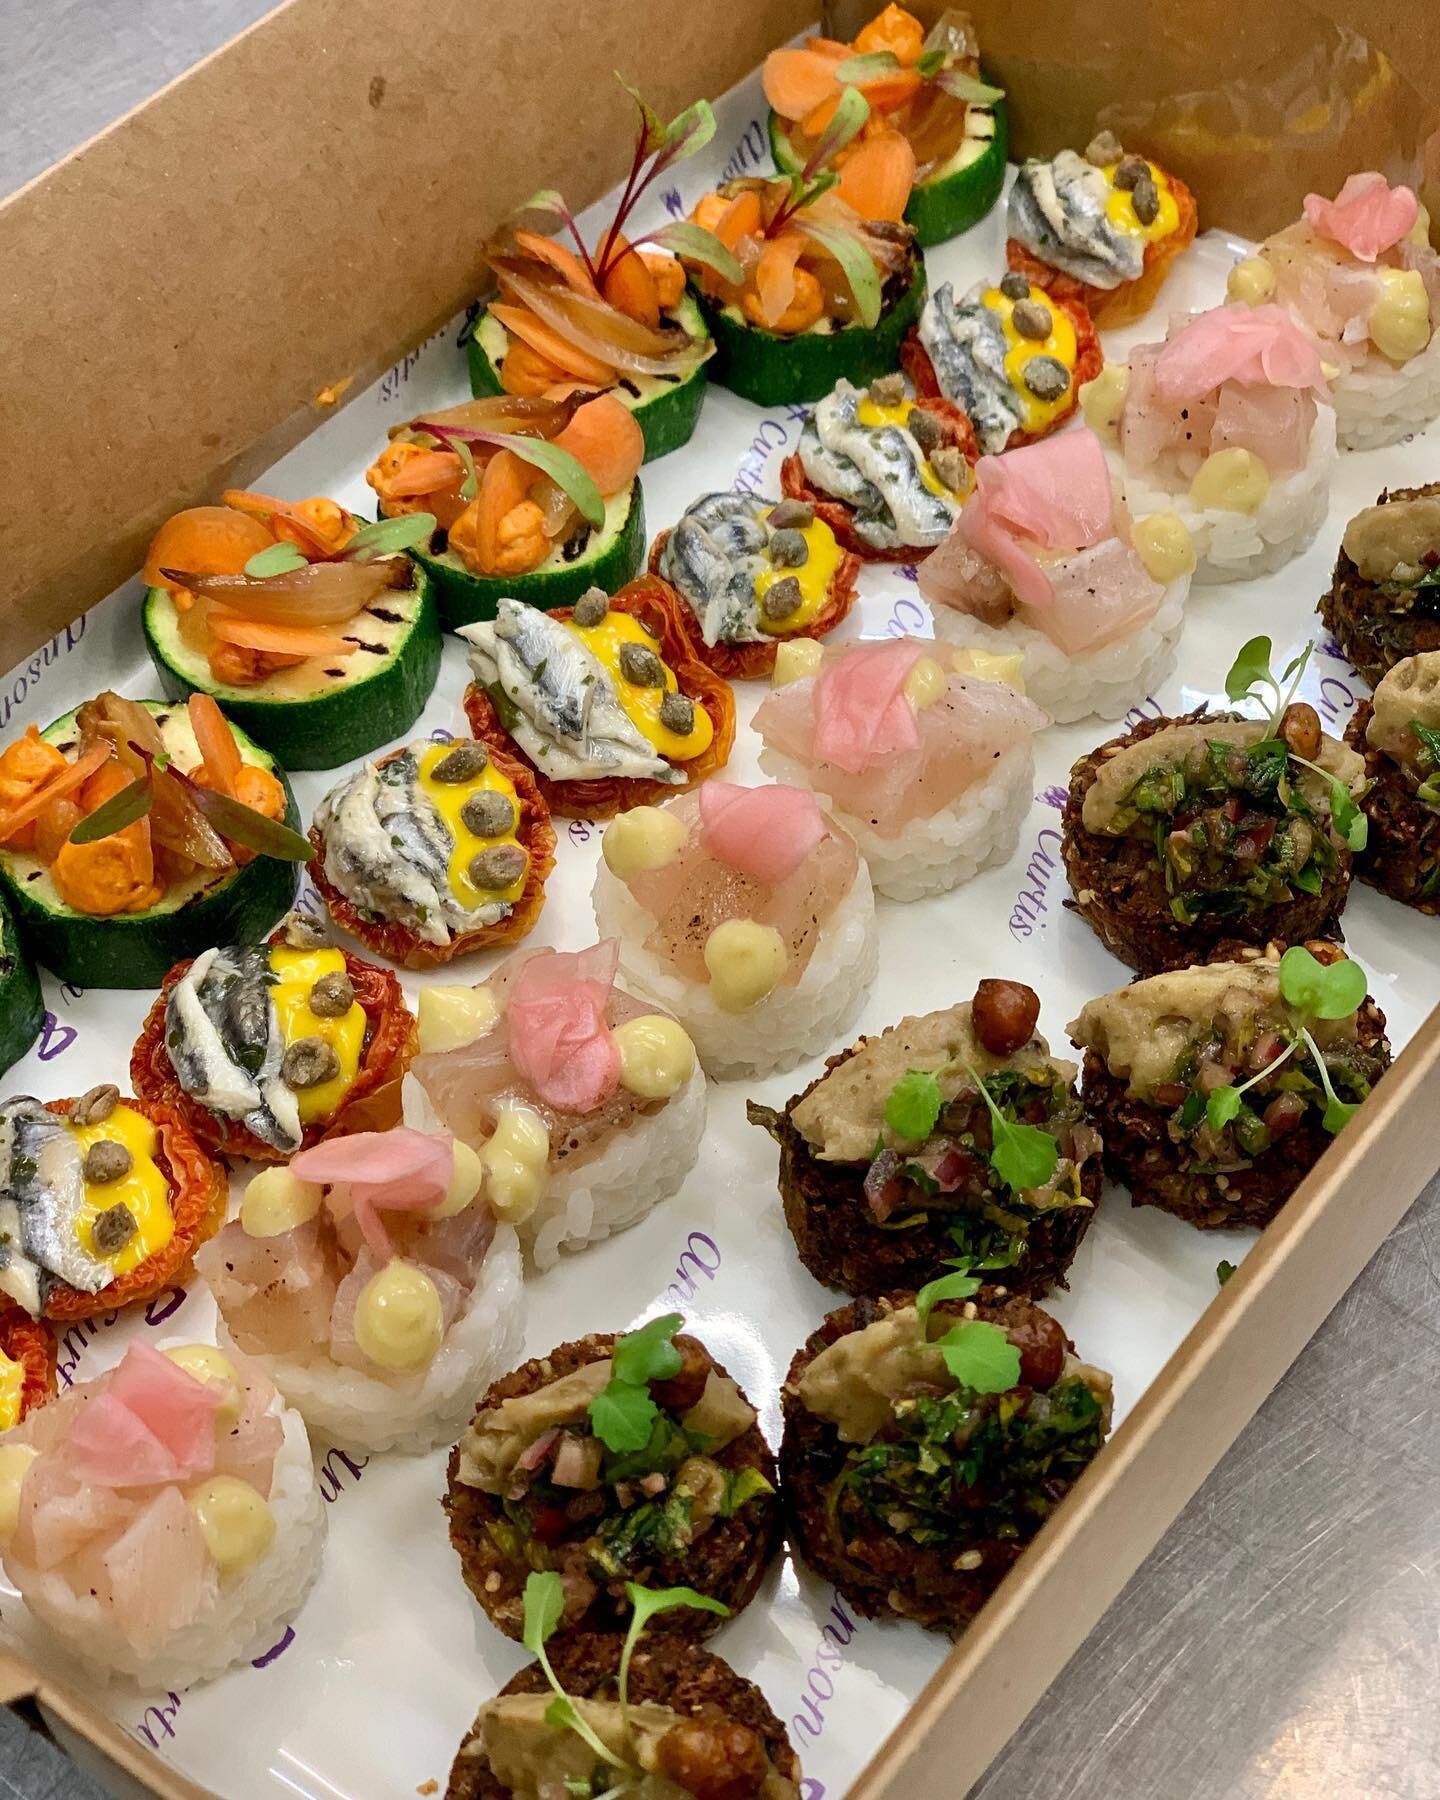 👩🏻&zwj;🍳 The Chefs Canap&eacute; Platter 👩🏻&zwj;🍳
Elizabeth creates and designs these platters based on seasonal ingredients. Every platter is different meaning you get to try new and exciting flavour combinations as if you were ordering a tast